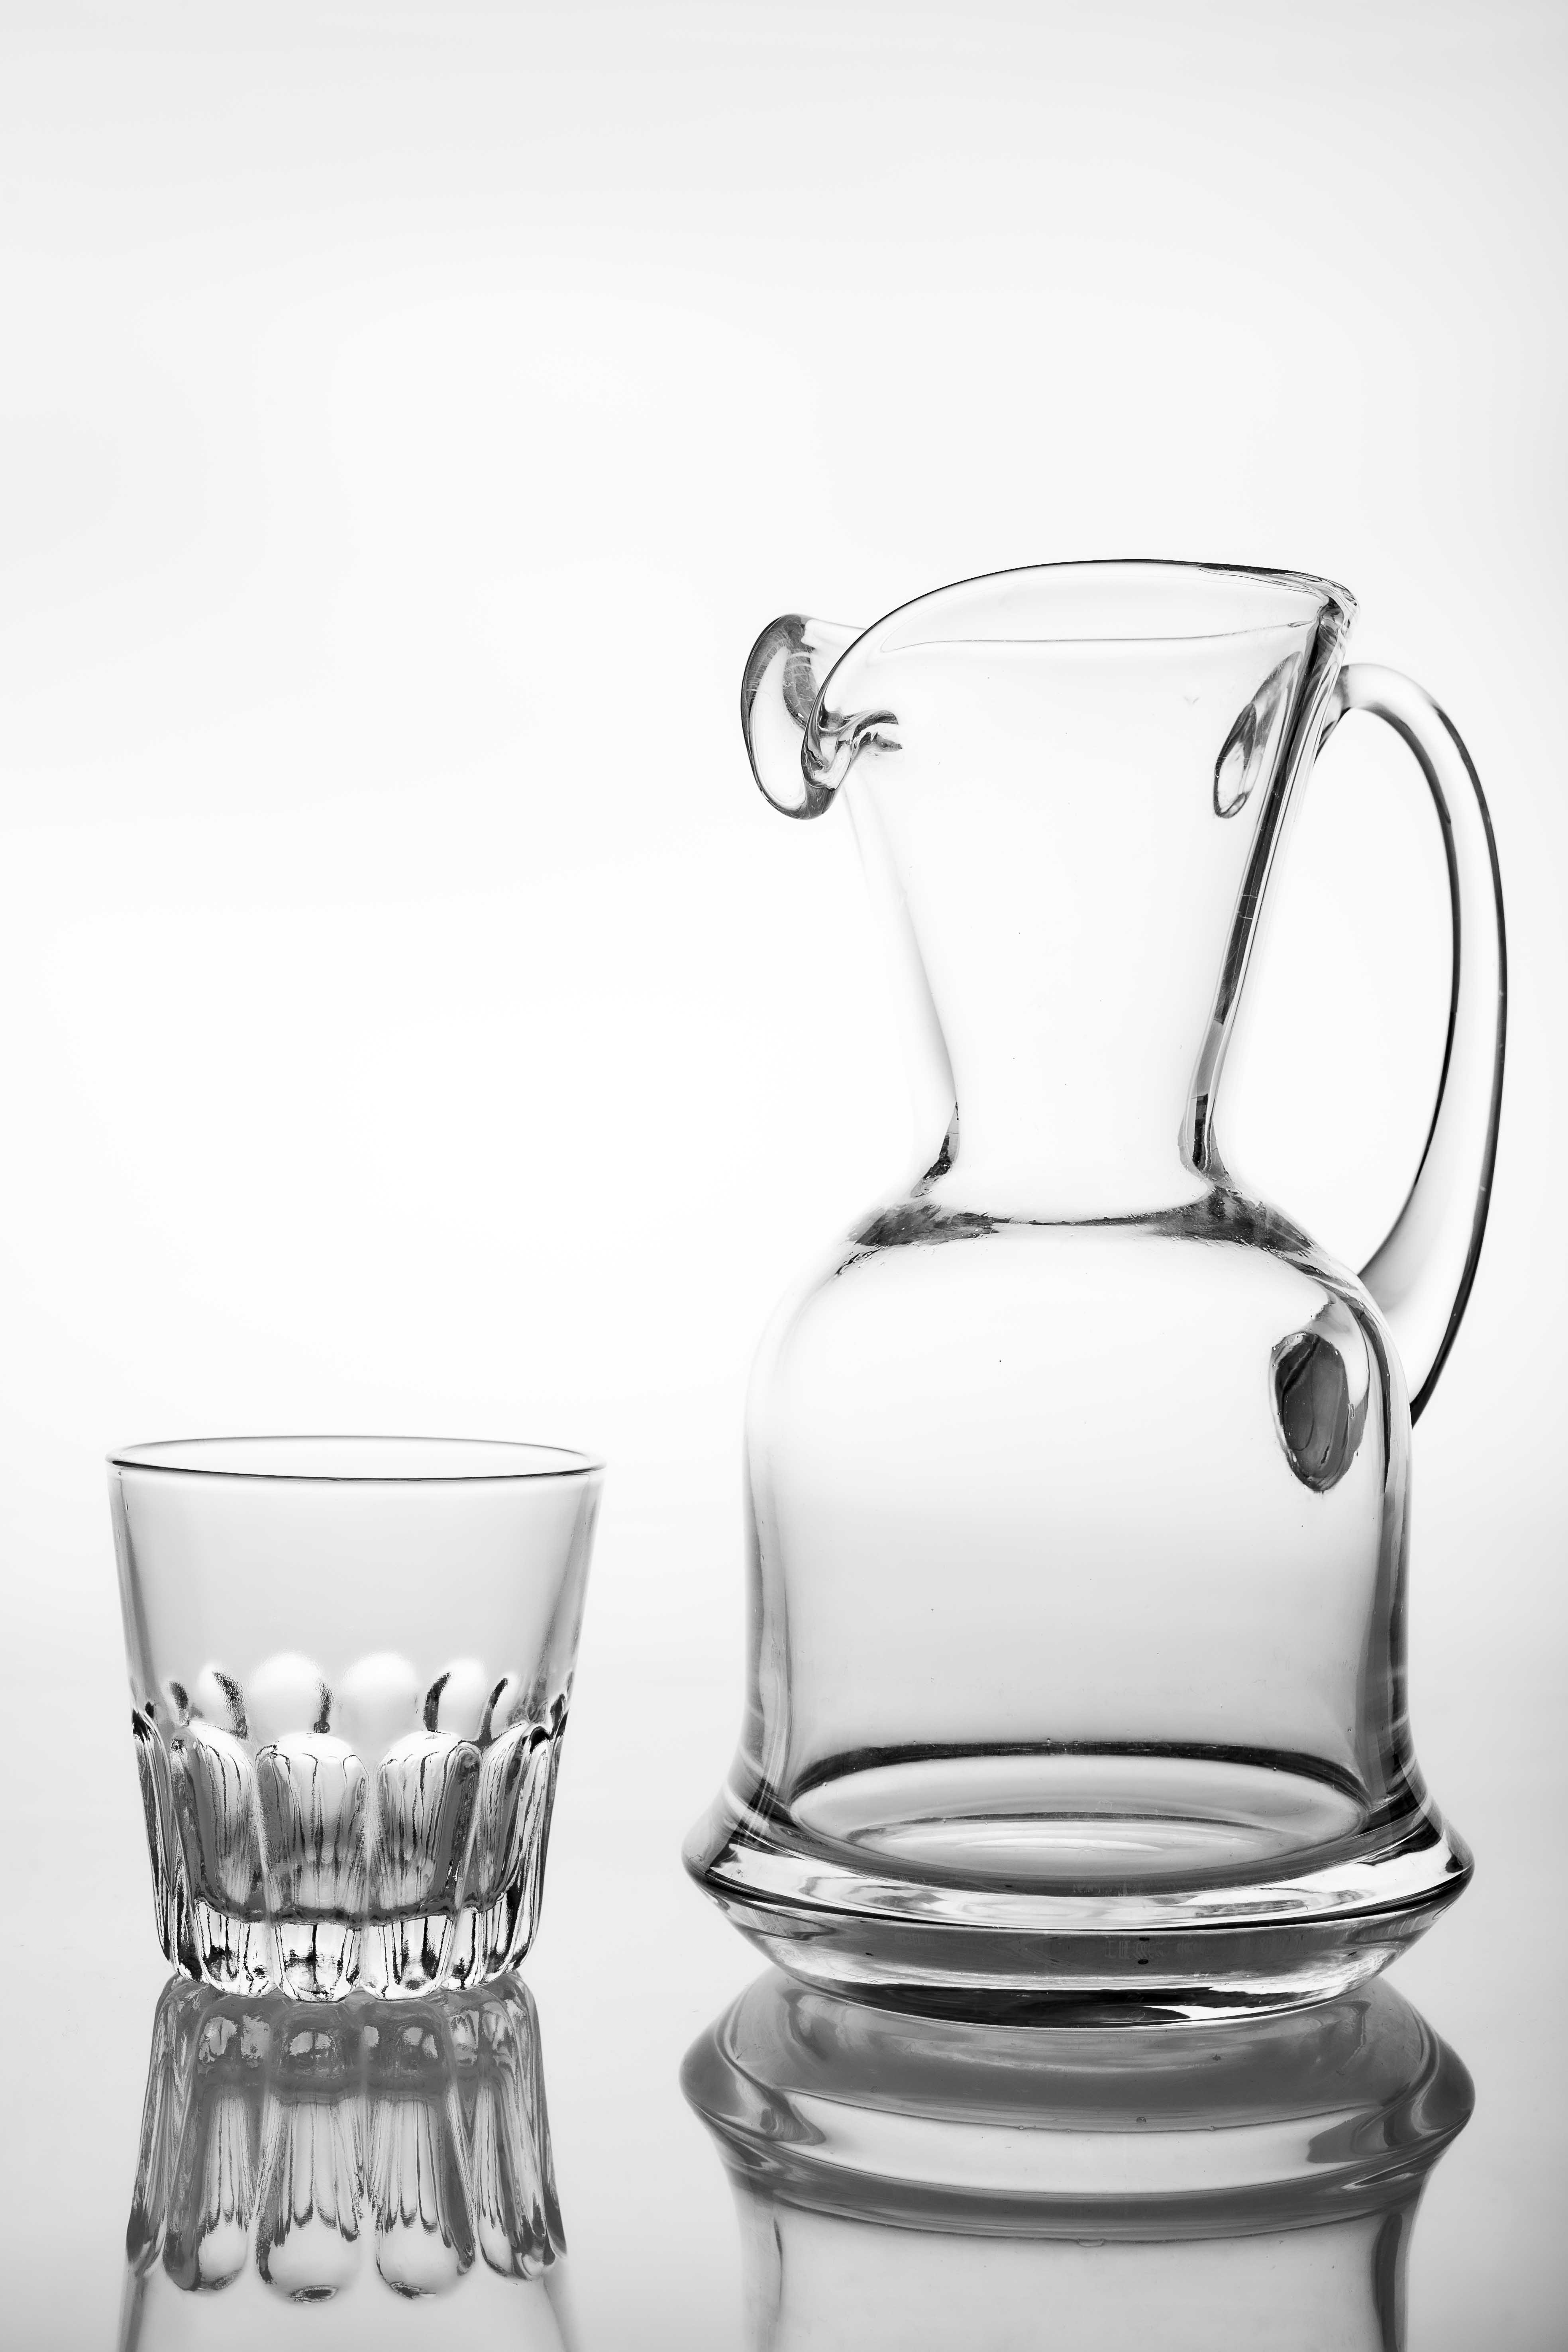 Slim glass water jug and glass. Containers for feeding water in the household. Light background.